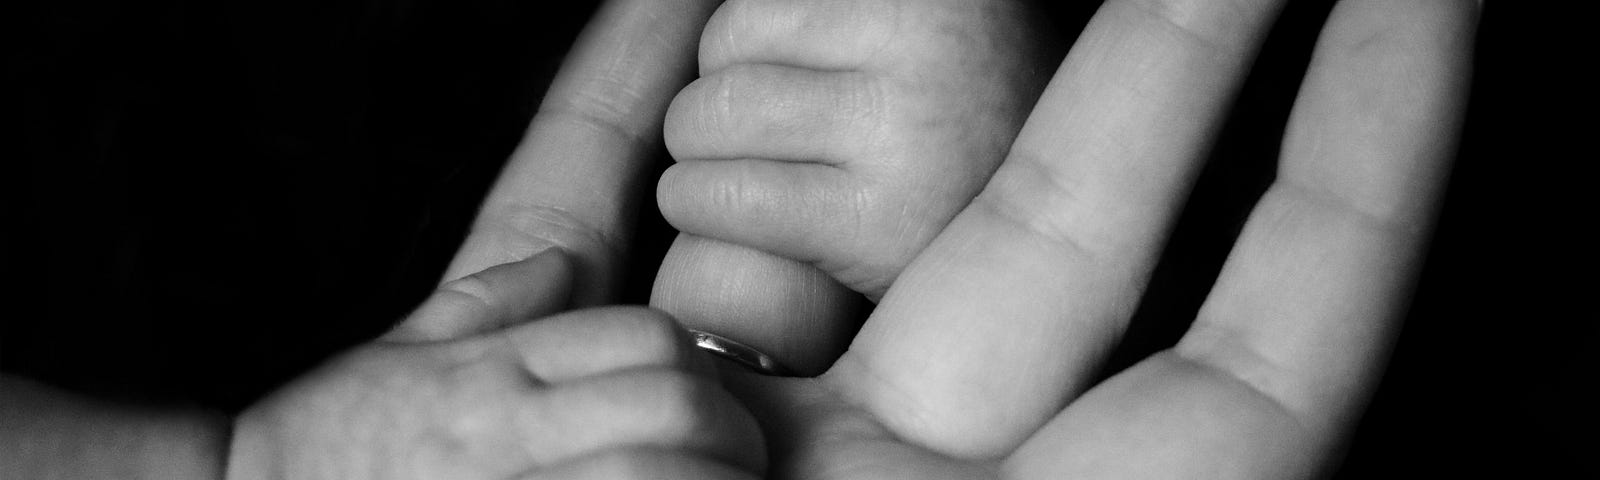 Black and white photo, an infants fingers wrap around its mother’s ring finger. The child’s other palm against mother’s palm.